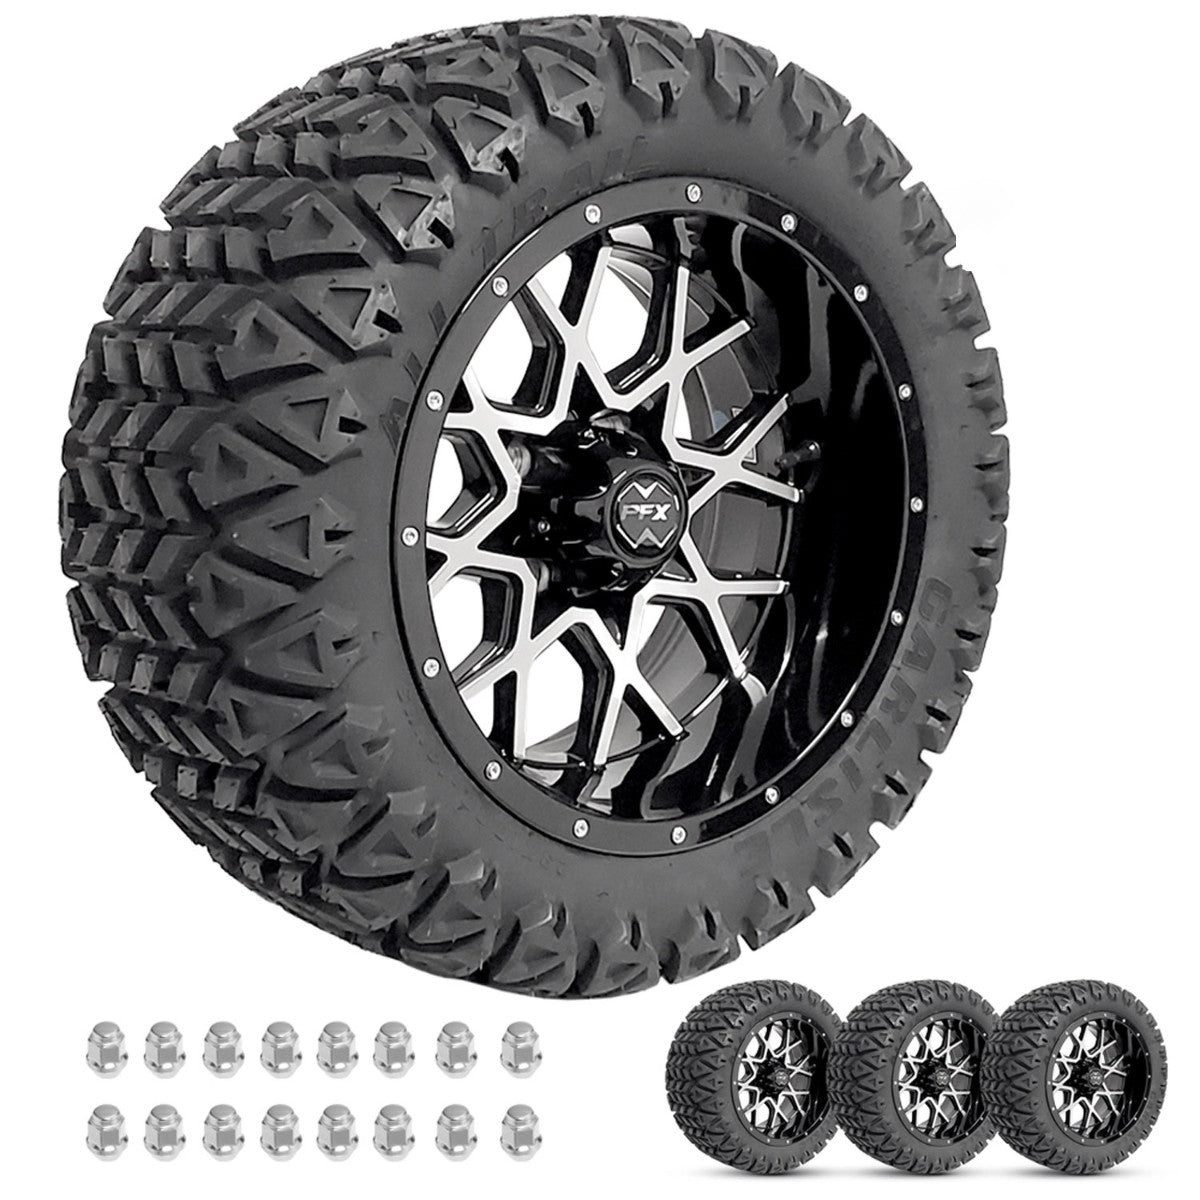 14" CHAOS Machined/Black Wheels on 23x10x14 A/T Tires - Lug Nuts Included